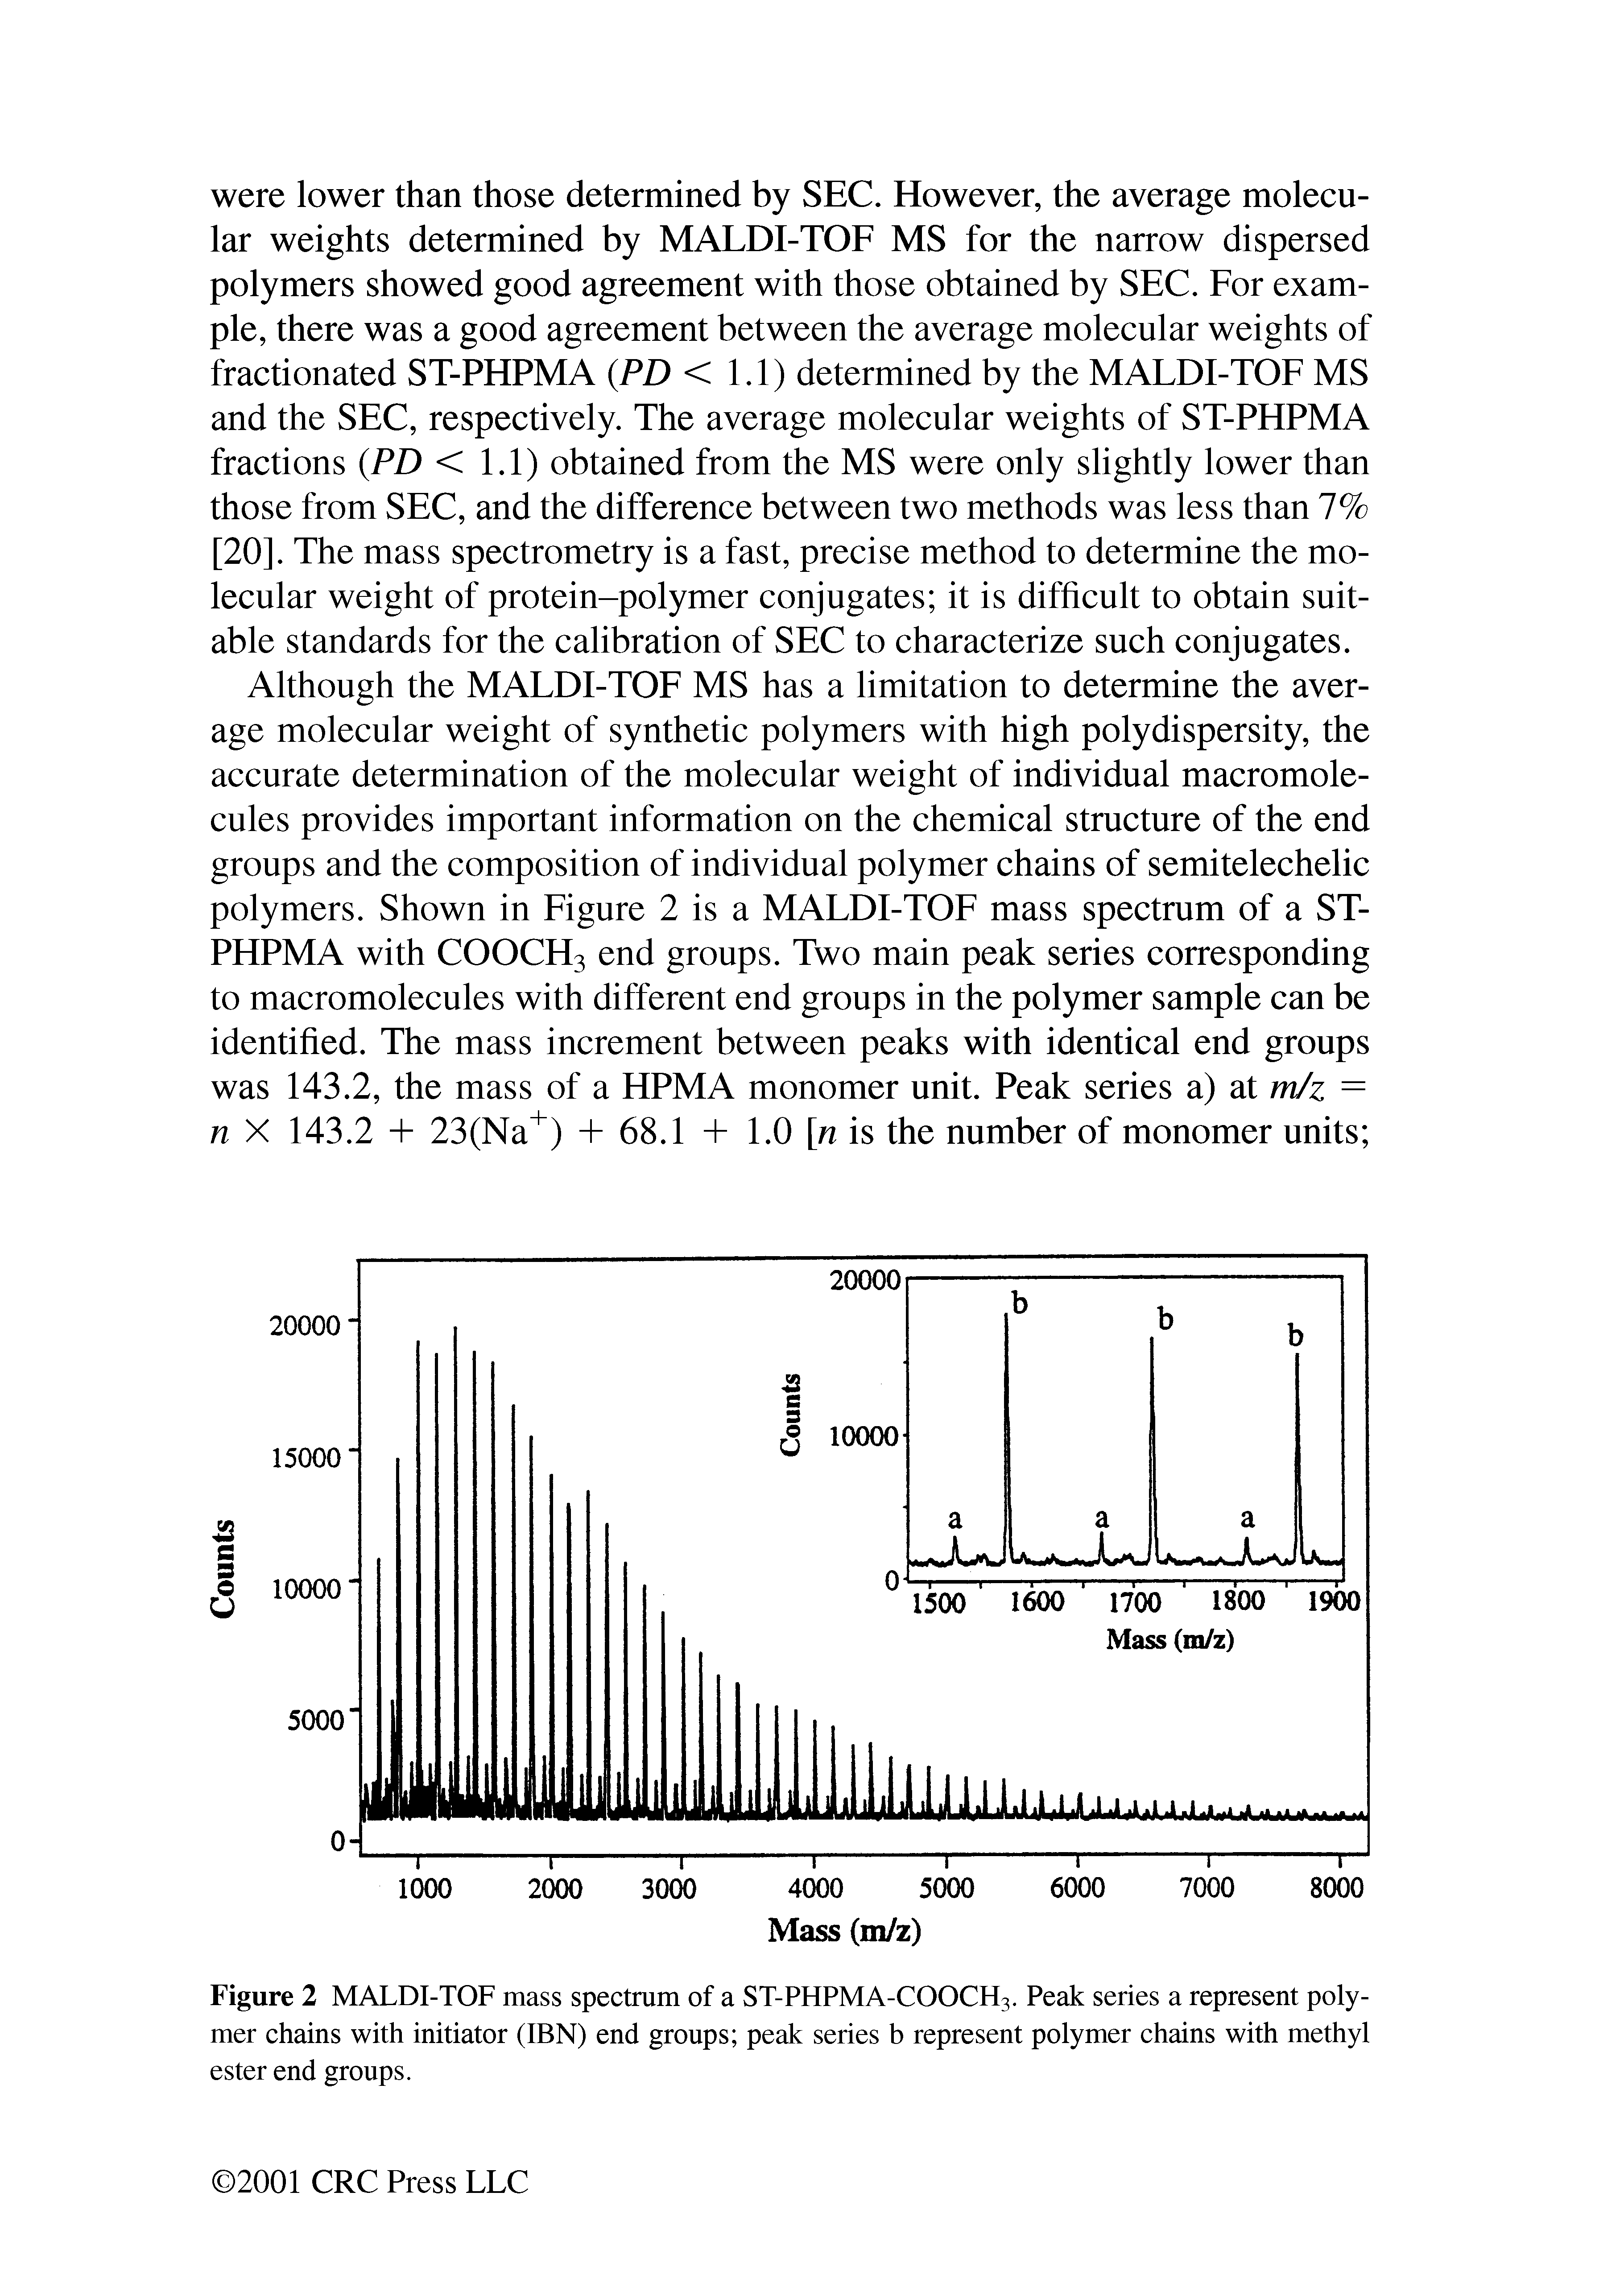 Figure 2 MALDI-TOF mass spectrum of a ST-PHPMA-COOCH3. Peak series a represent polymer chains with initiator (IBN) end groups peak series b represent polymer chains with methyl ester end groups.